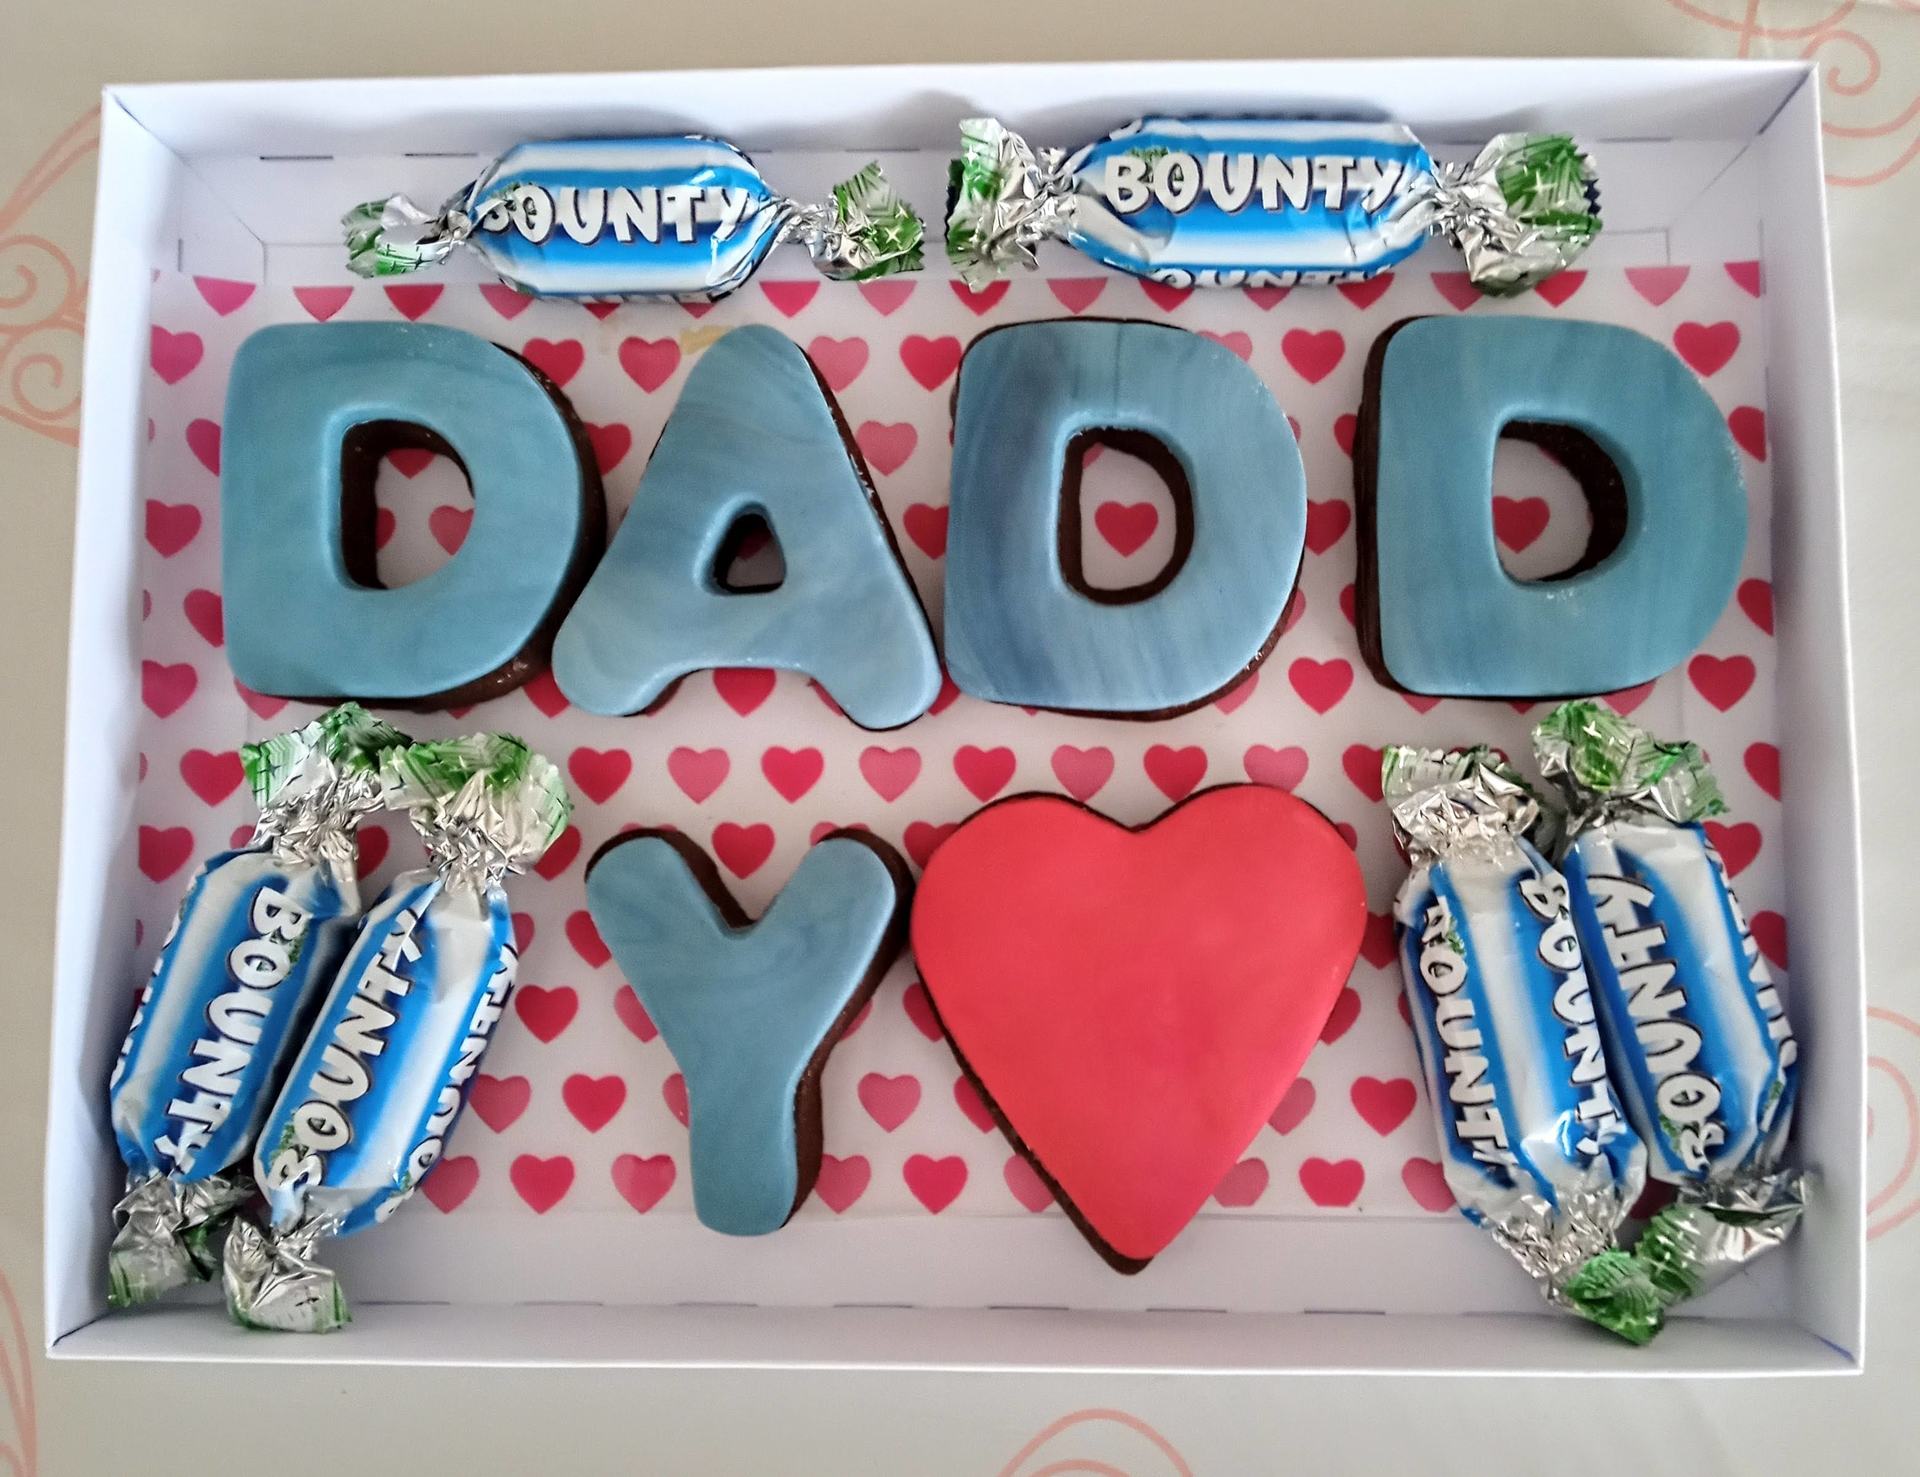 "Daddy" fondant decorated cookies